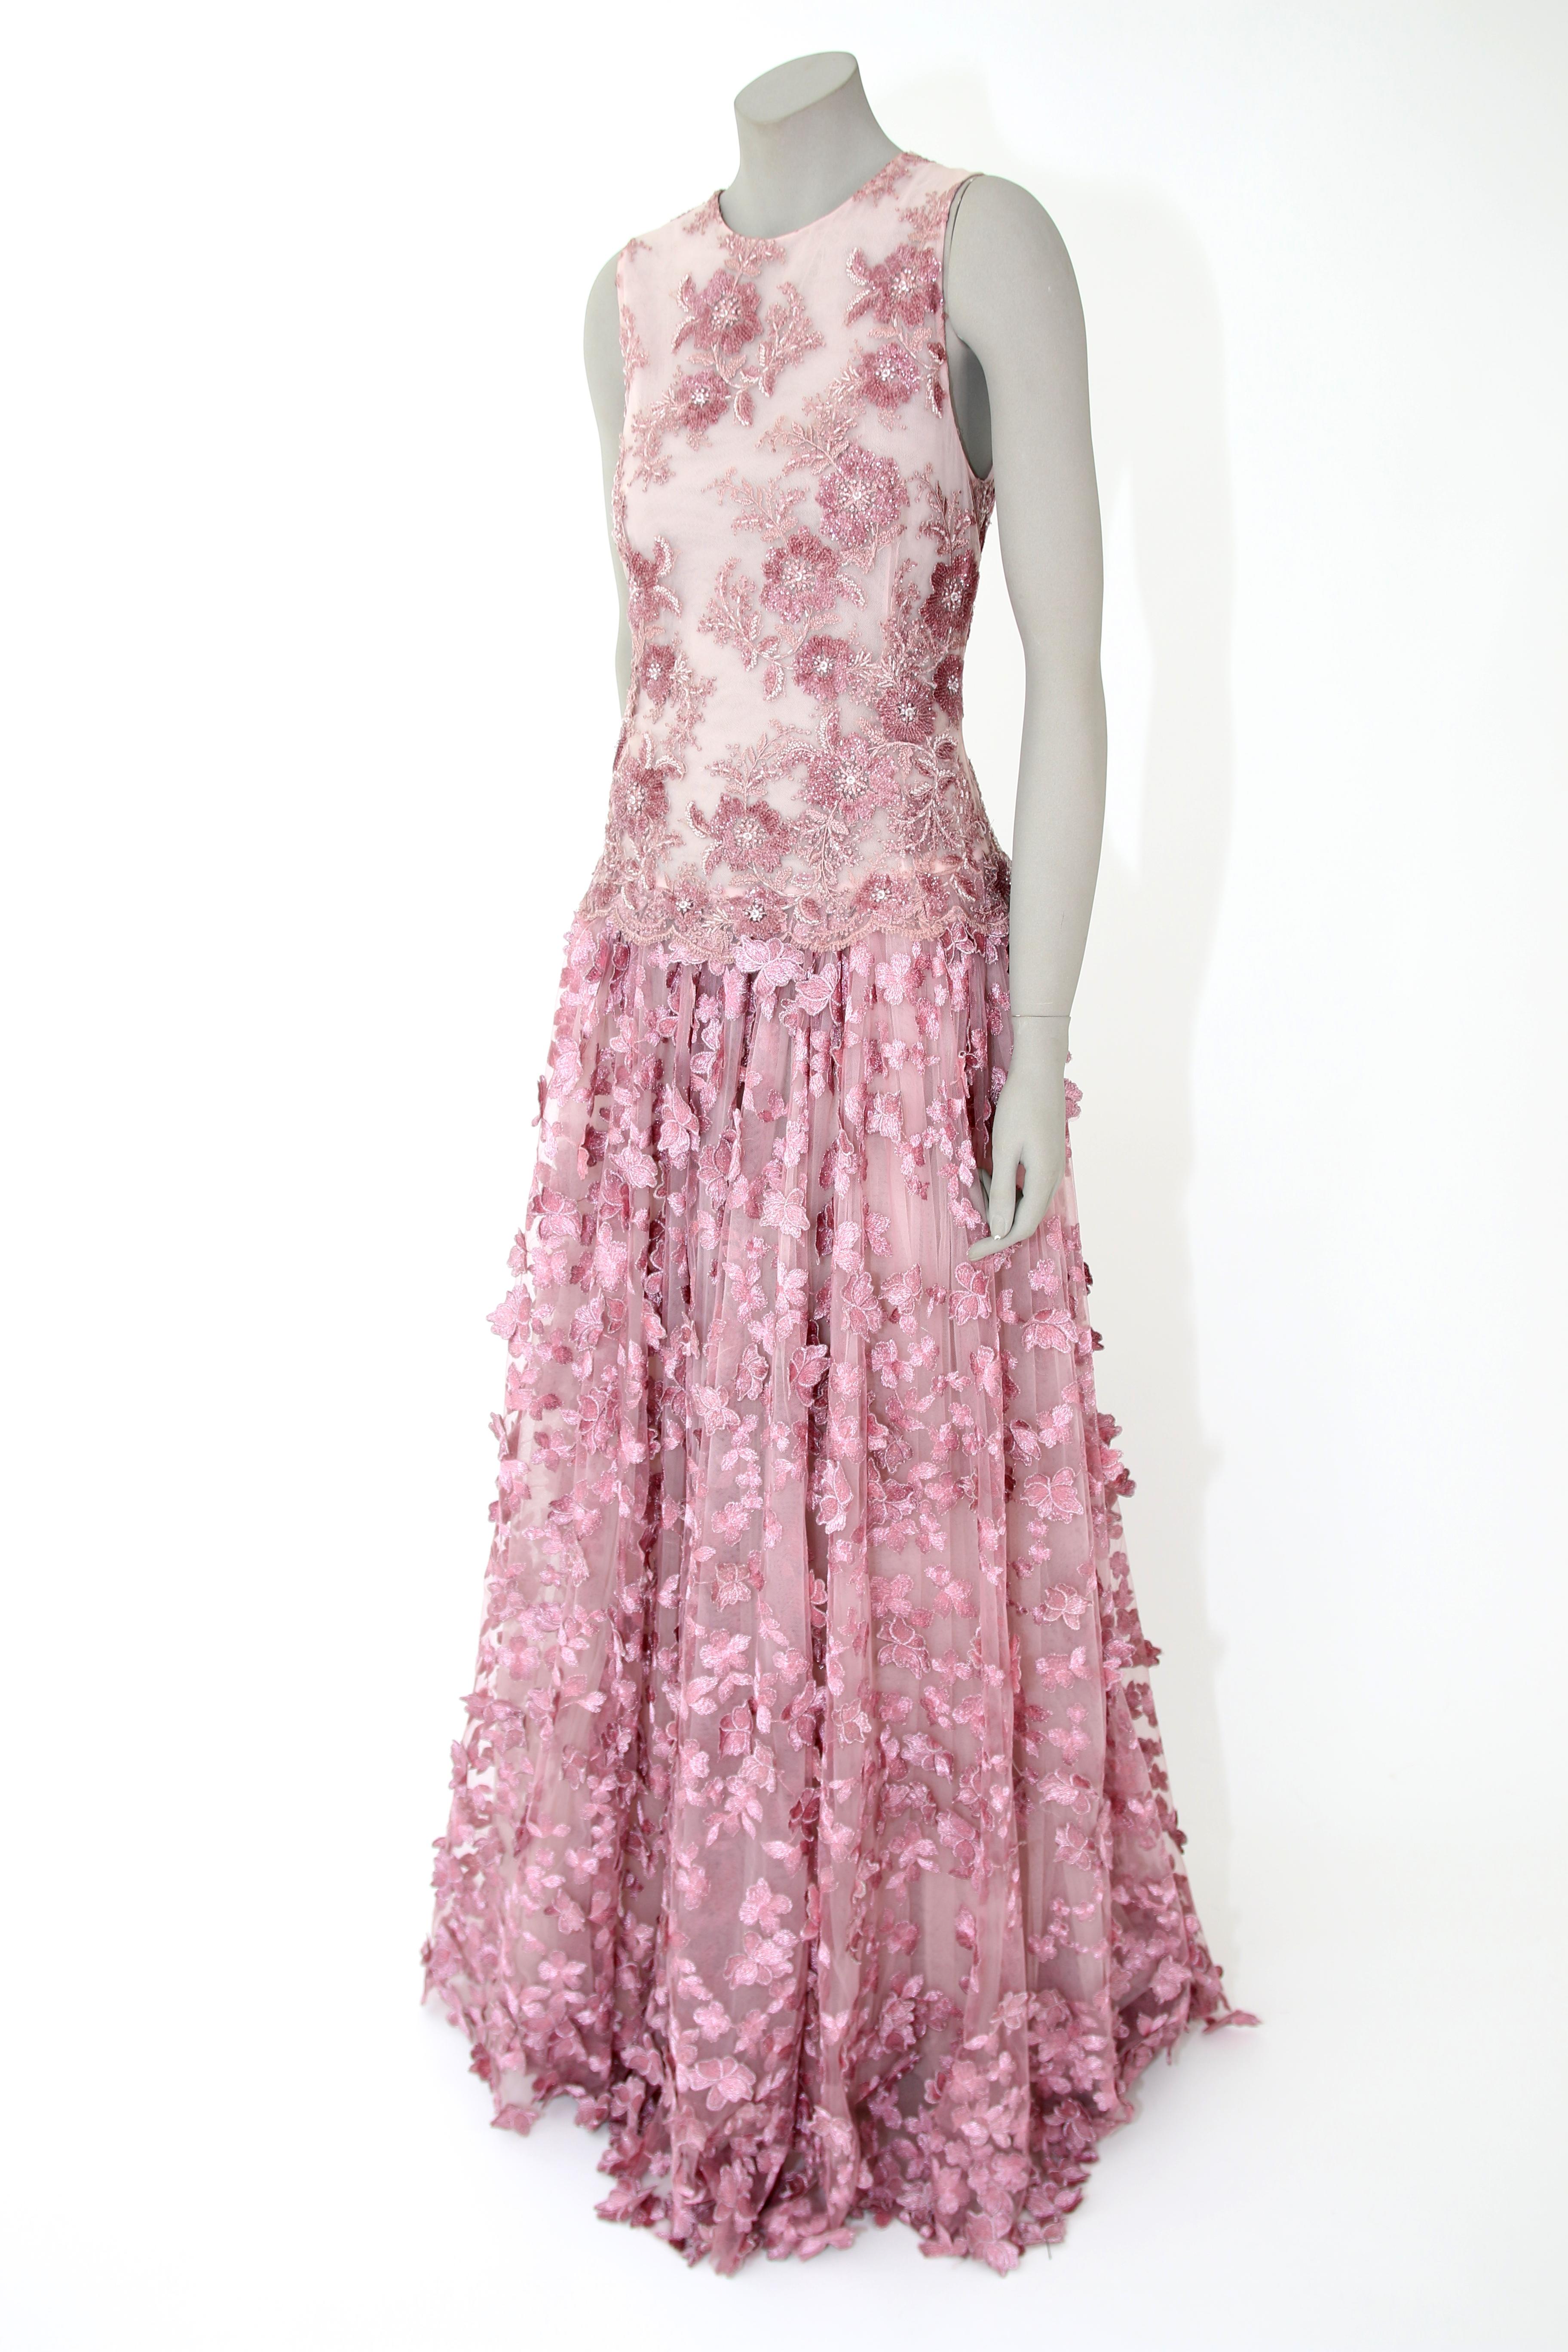 Pelush Pink Tulle Dress Gown With Three Dimensional Flowers And Embroidery - S For Sale 1